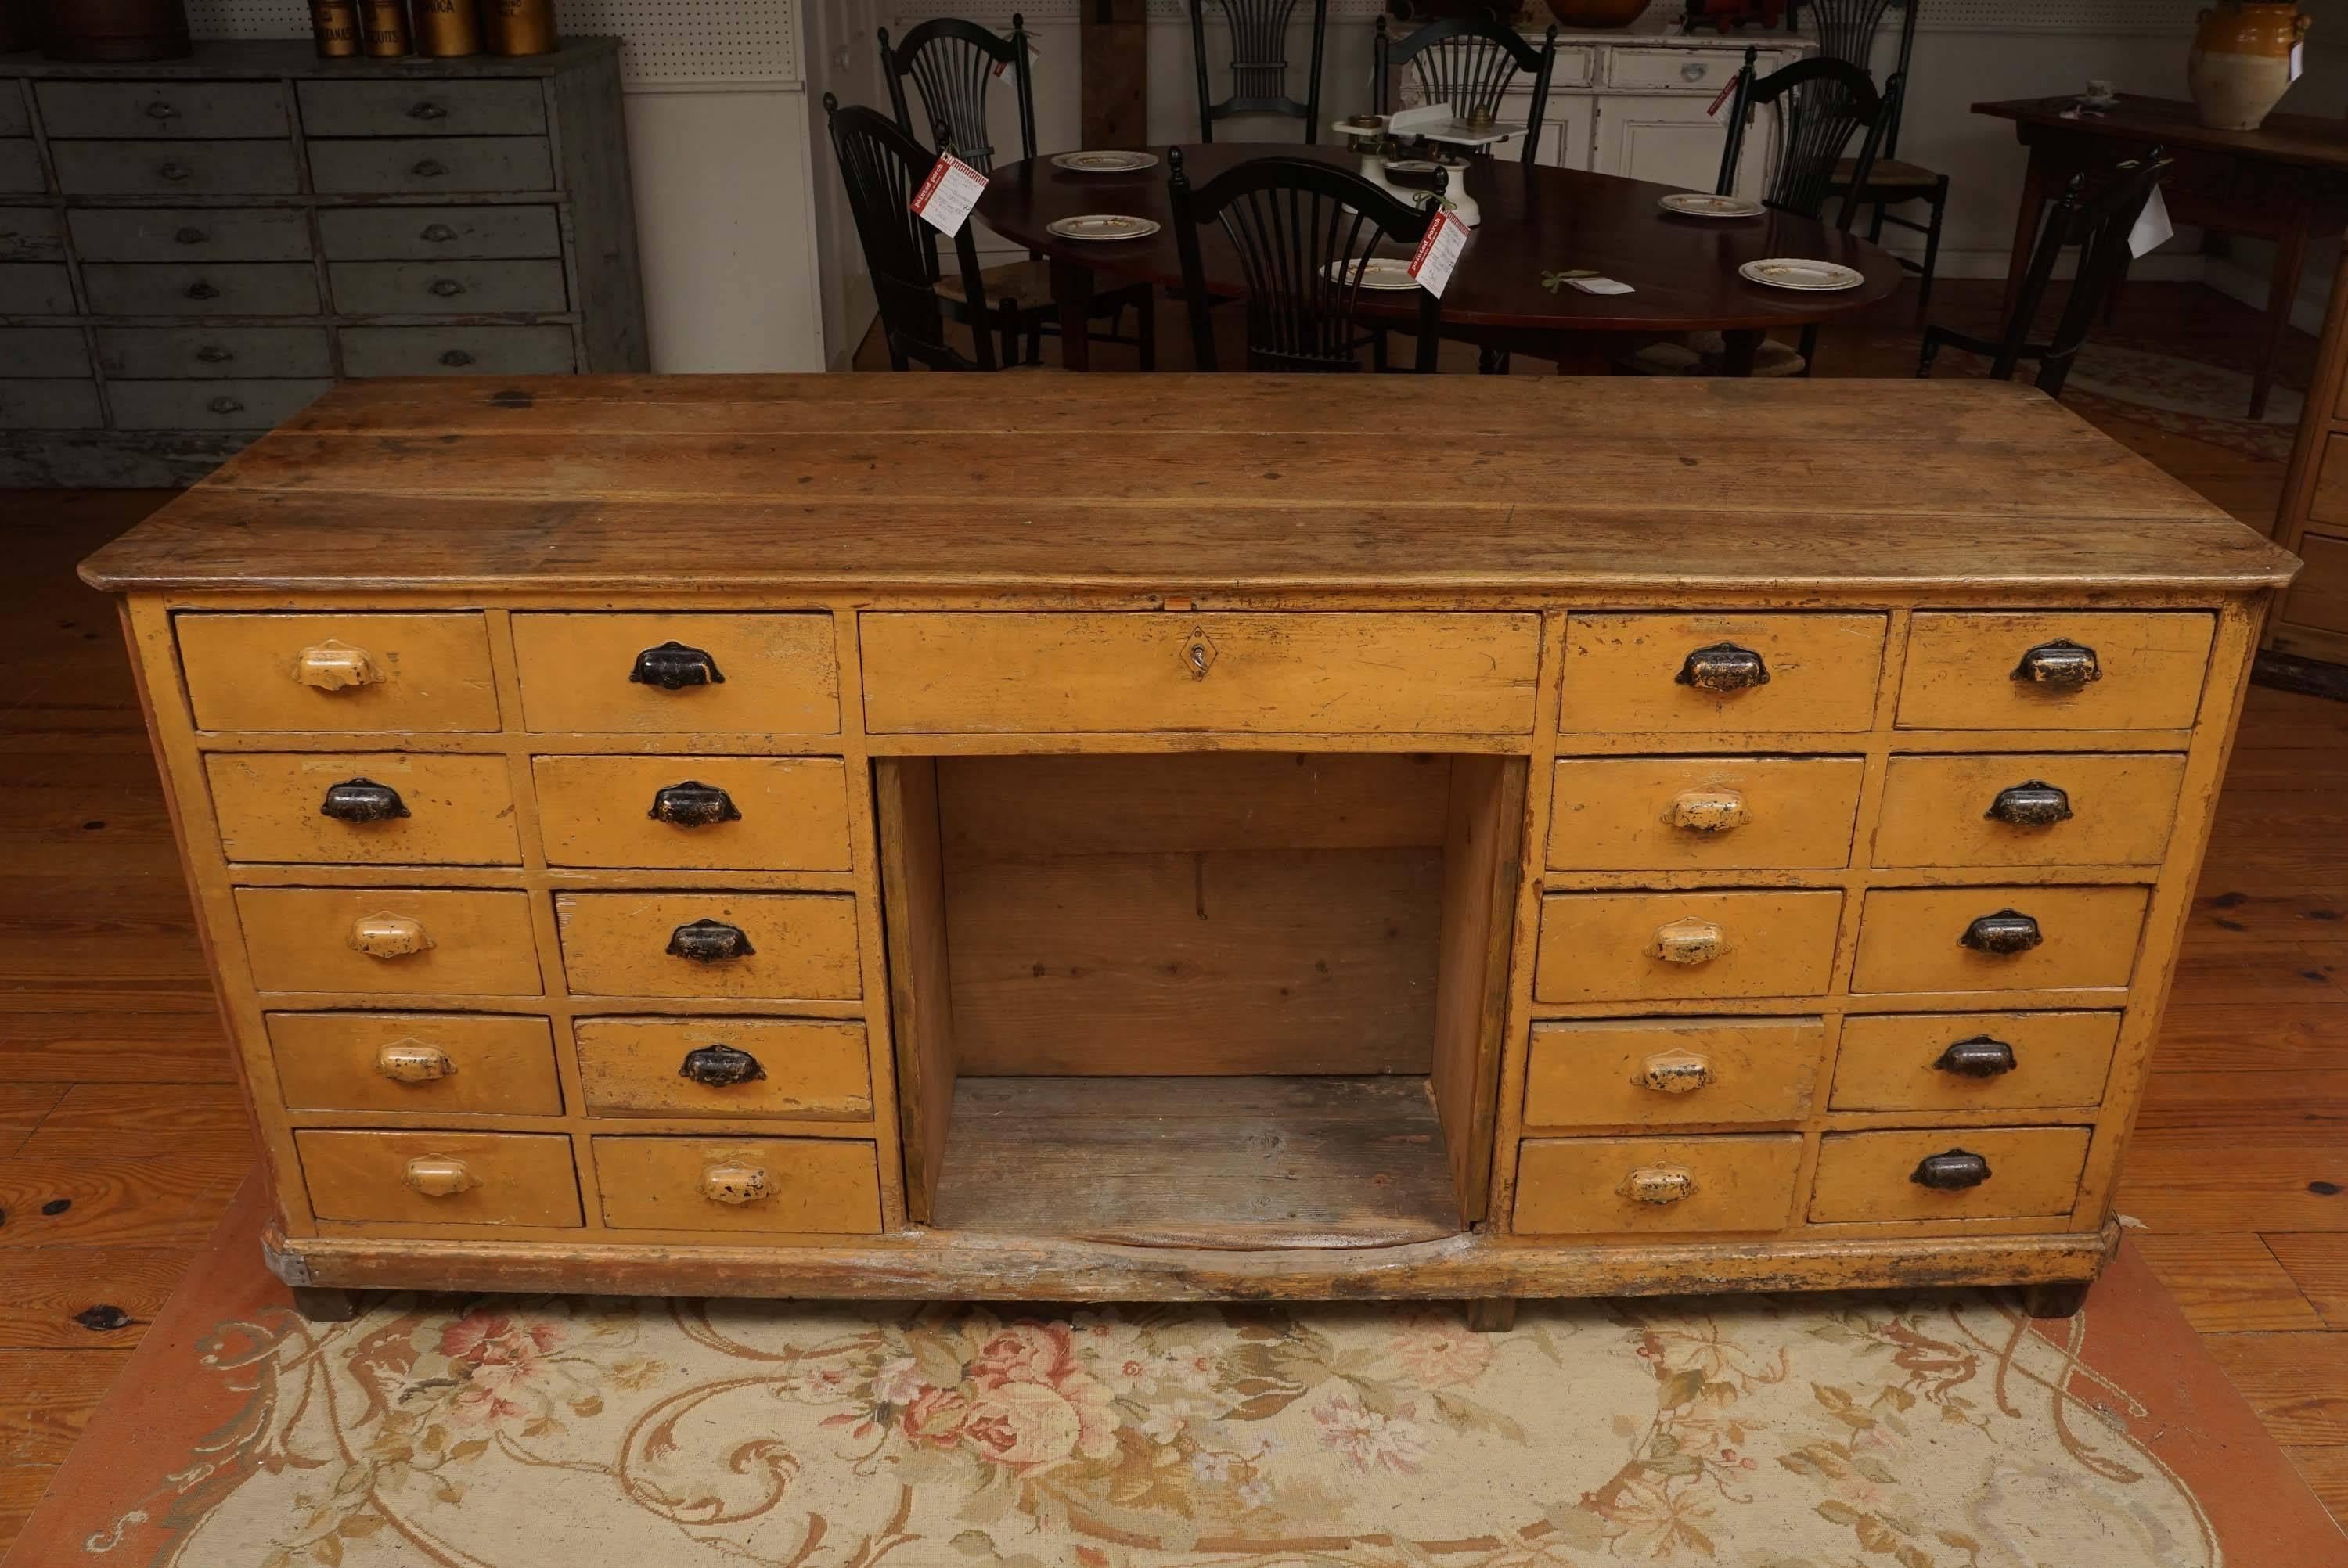 This is one of the most unique pieces we have bought in several years. It has original caramel shade paint and all original hardware. There are drawers on both sides of this One of a Kind hardware store counter from the south of France. There is a